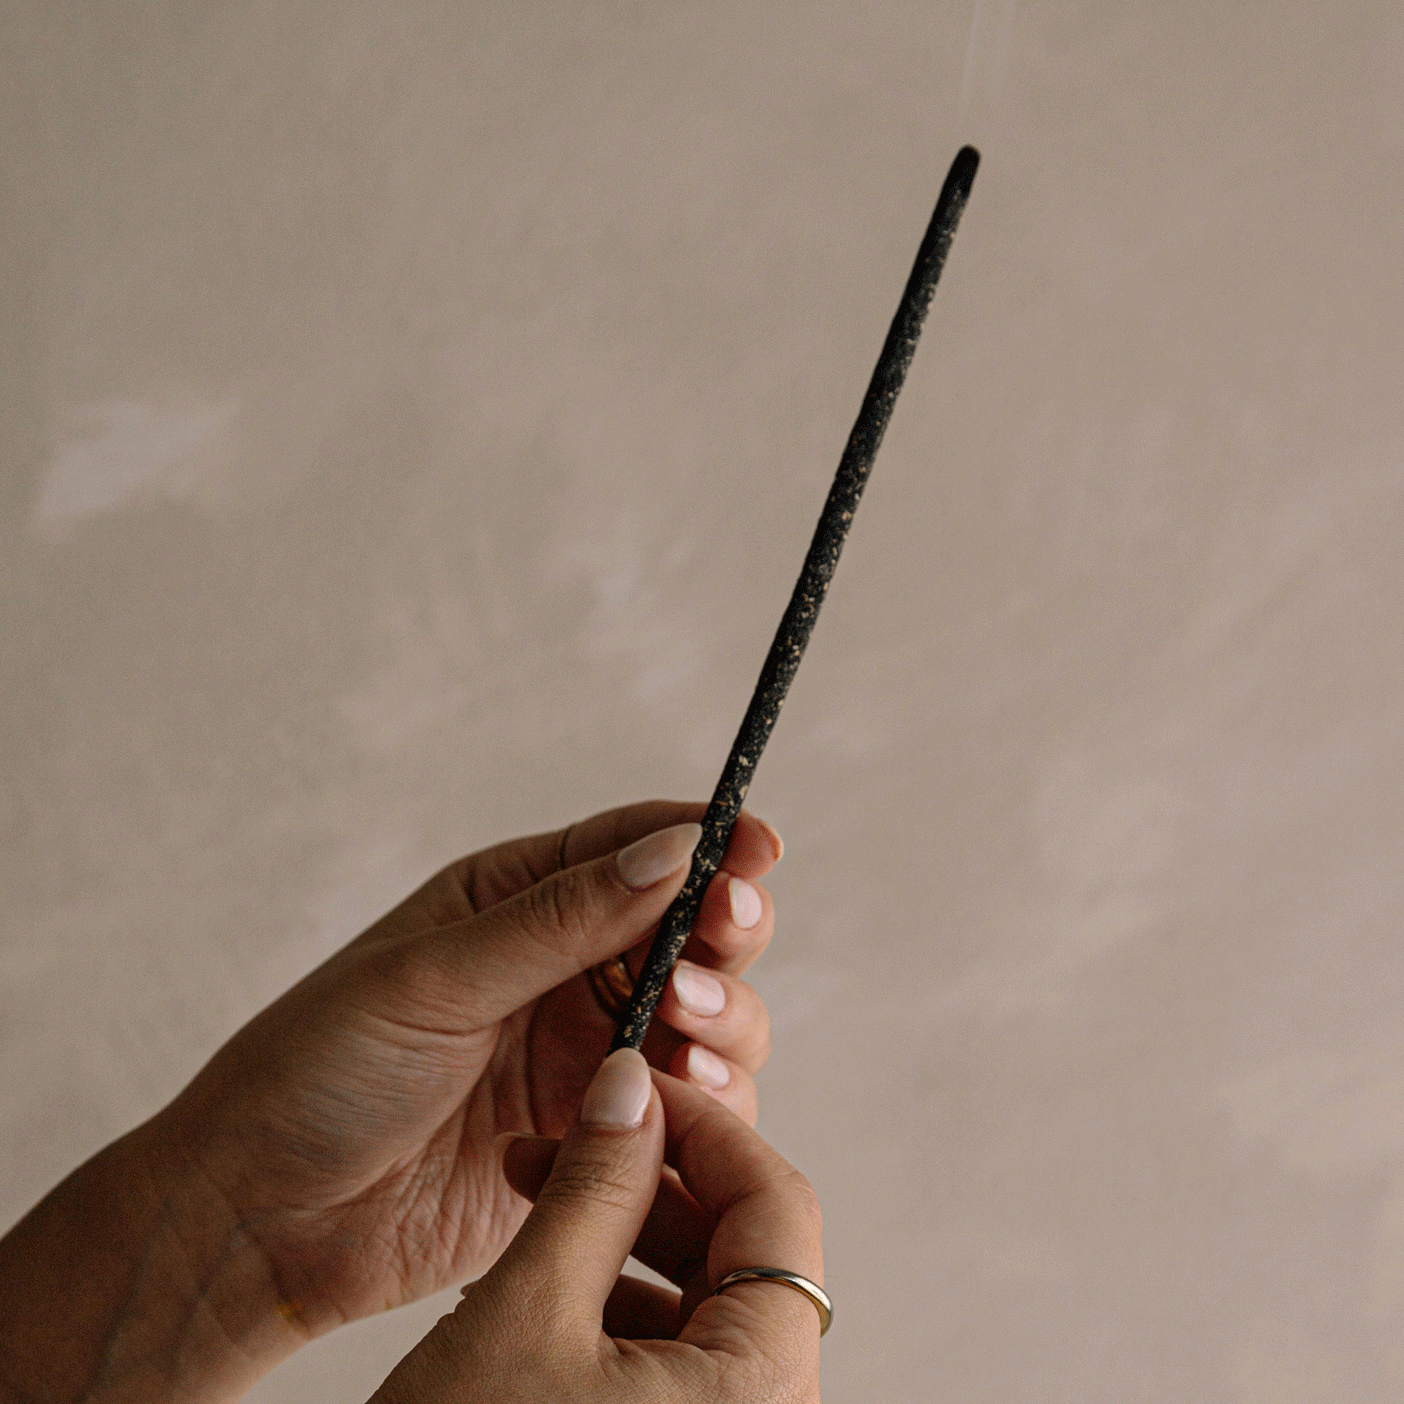 A gif showing the process of burning copal incense.